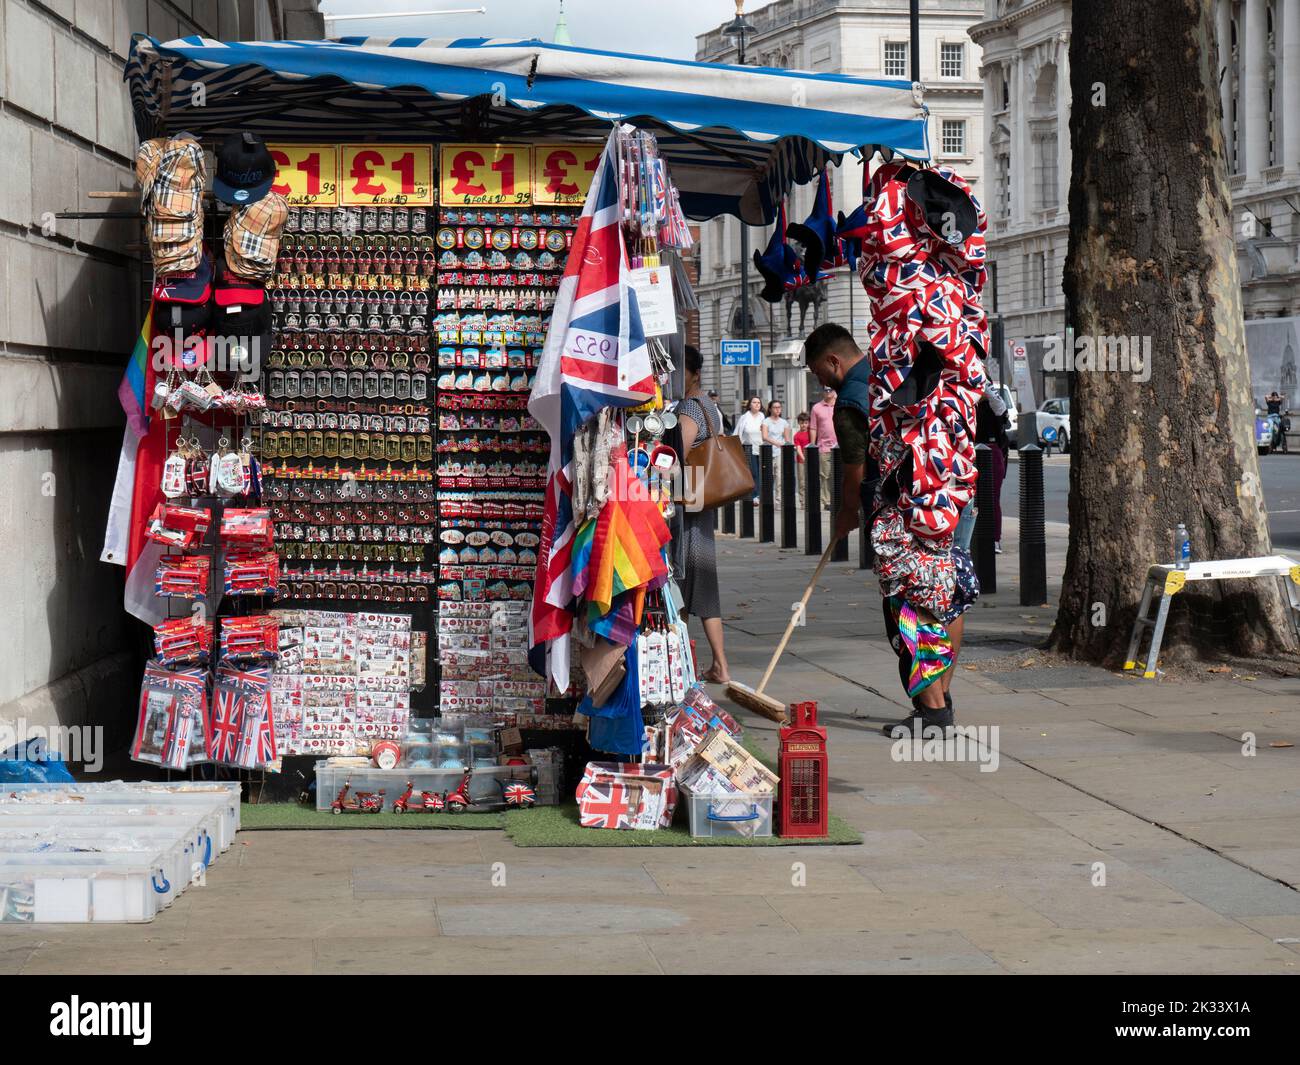 Souvenir stall in Whitehall London, with pound sterling signs and London tourist goods for sale Stock Photo